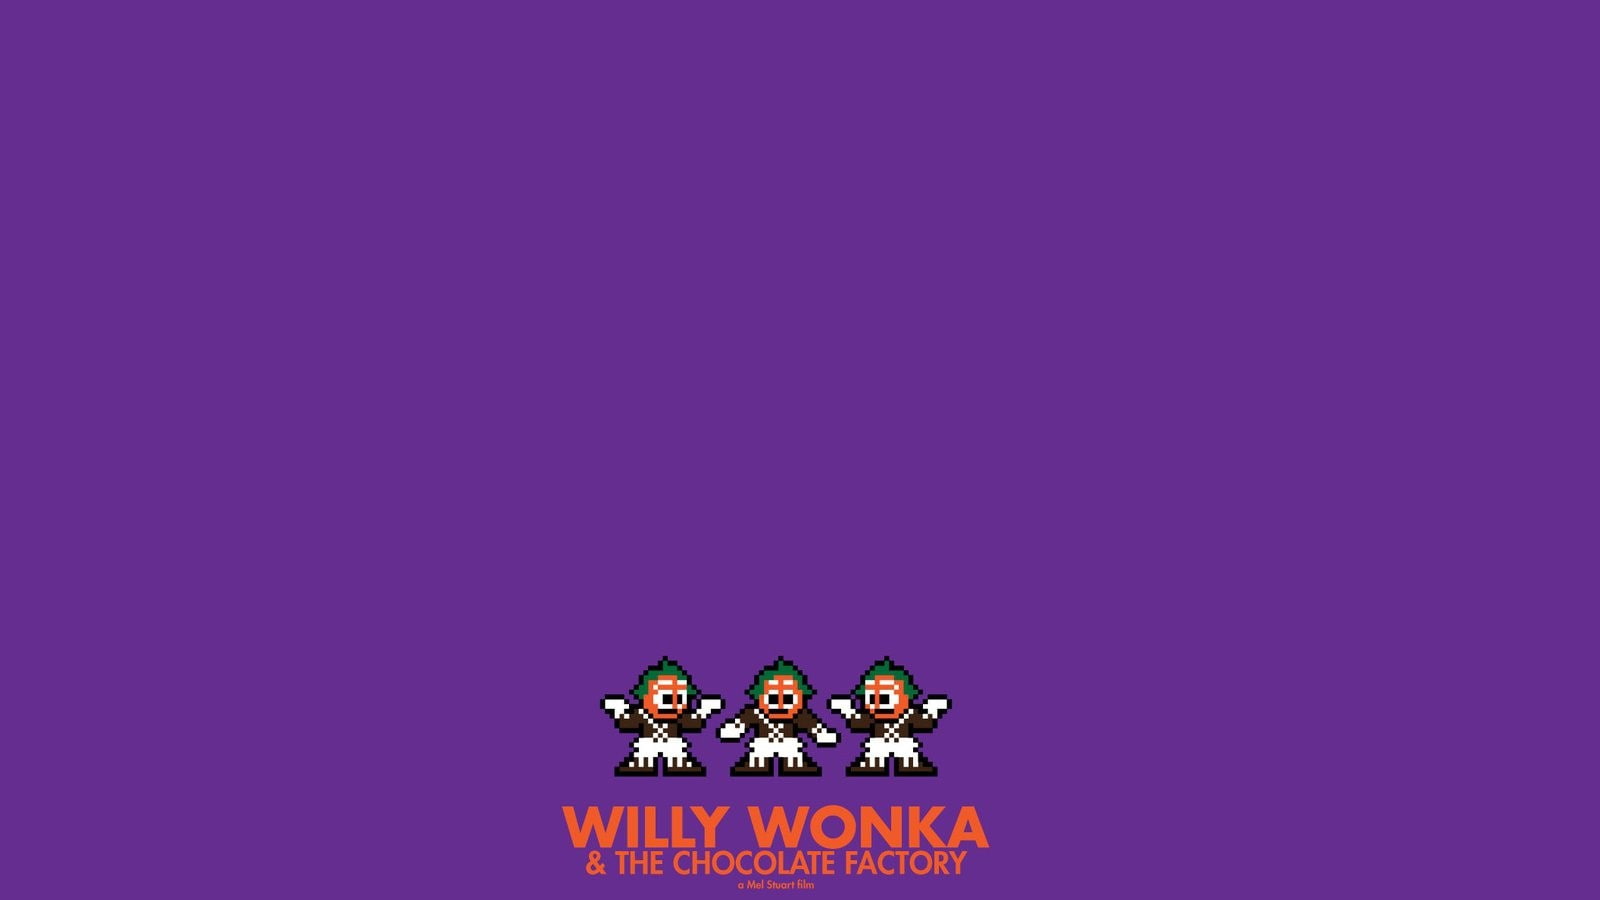 8 bit, chocolate, factory, movies, posters, willy, wonka